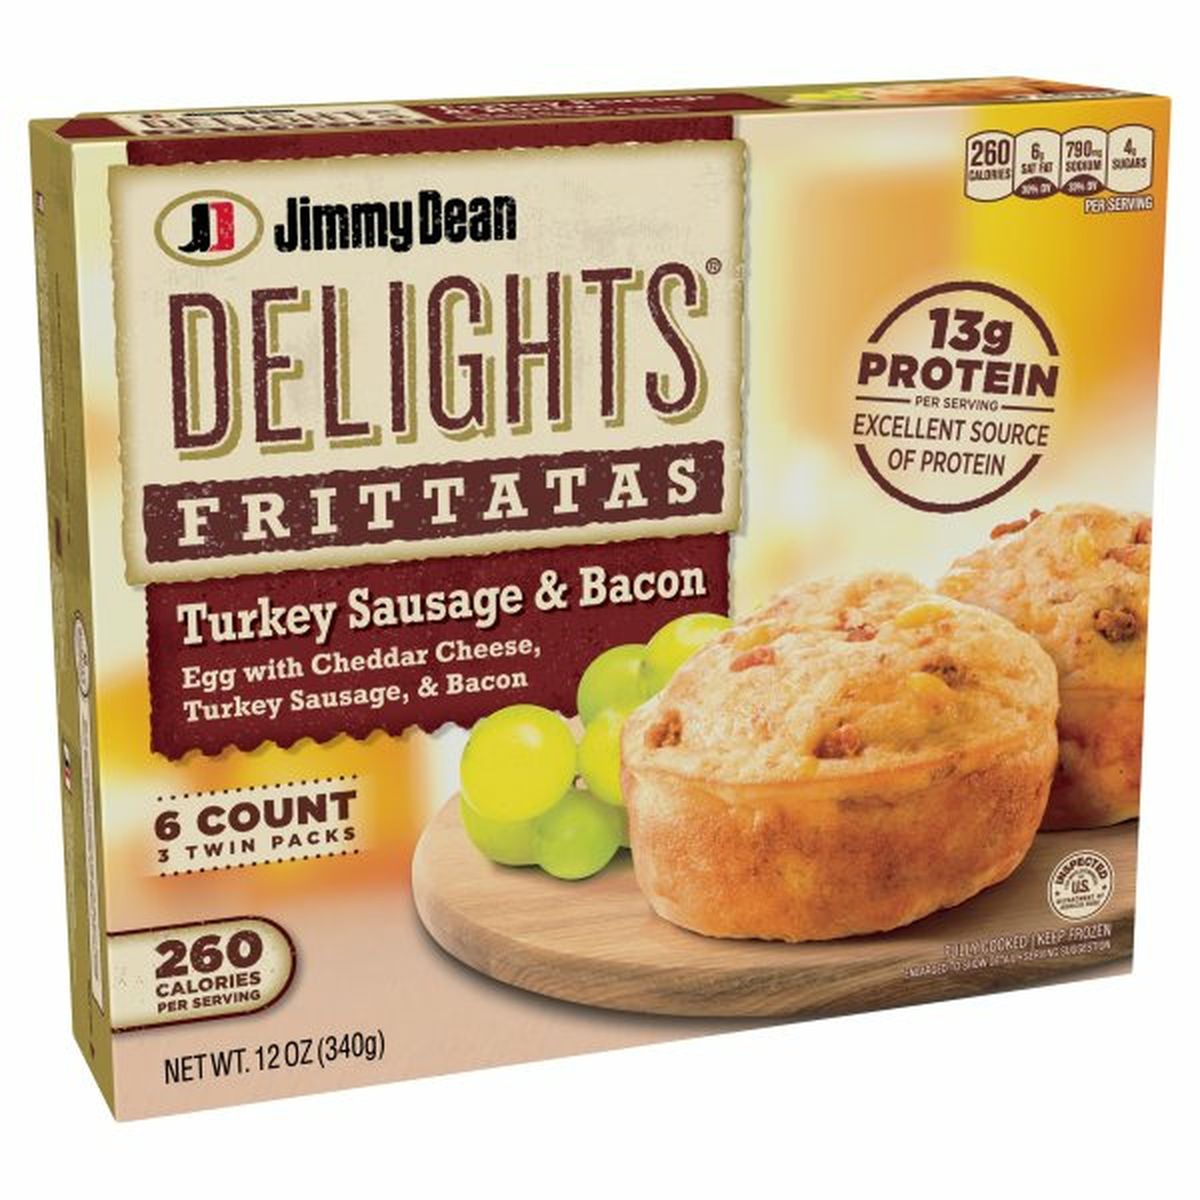 Calories in Jimmy Dean Delights Turkey Sausage and Bacon Frittatas, 6 Count (Frozen)